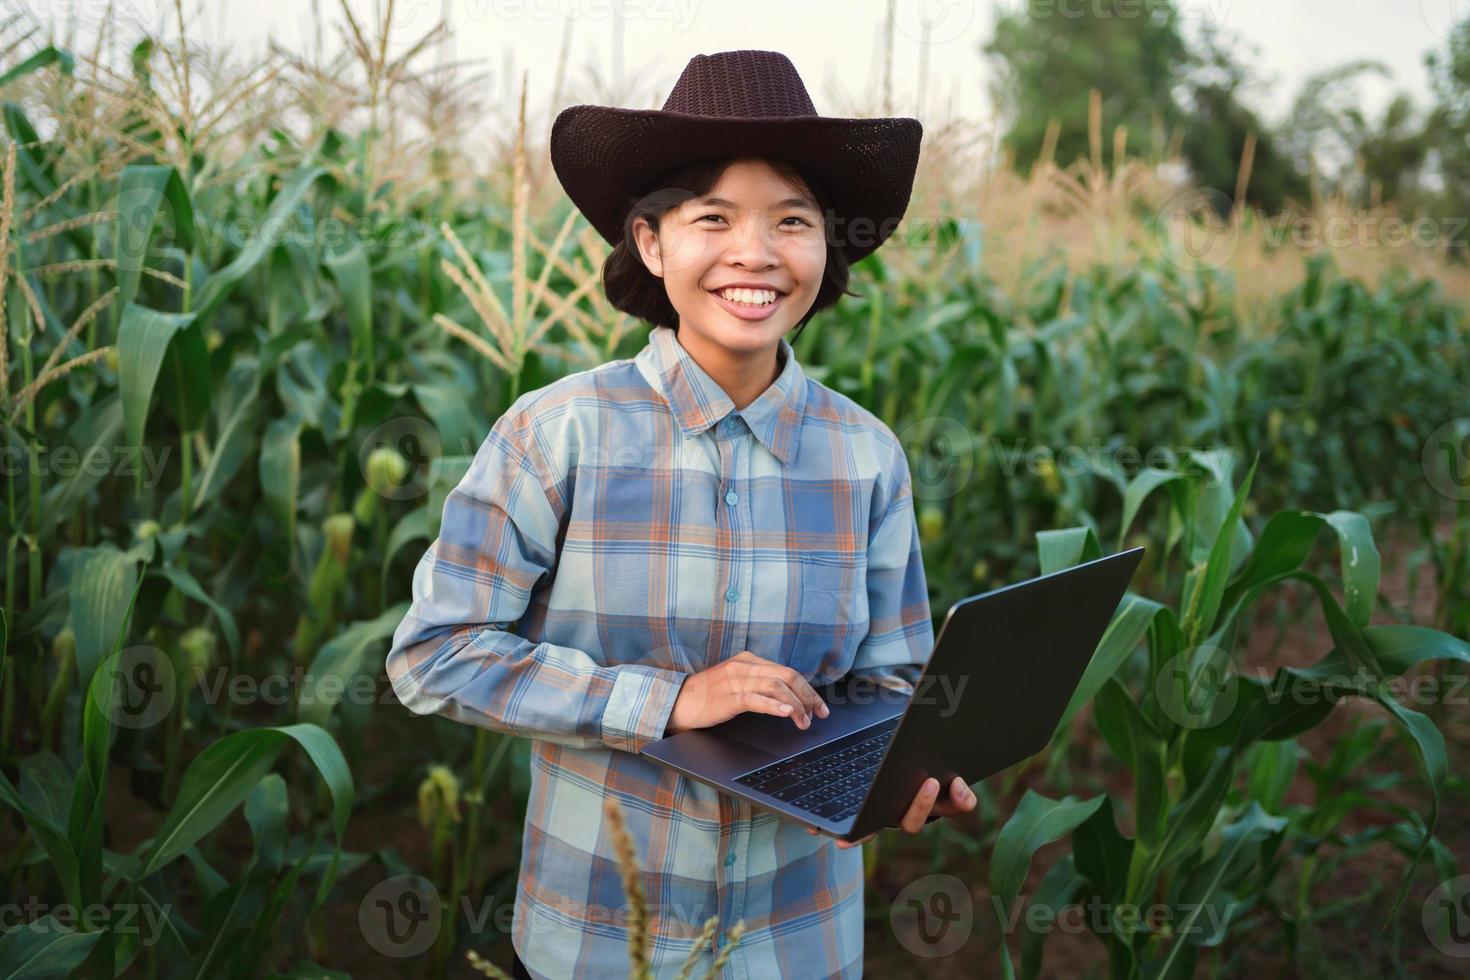 young woman standing use laptop checking corn in farm. technology agriculture conept photo